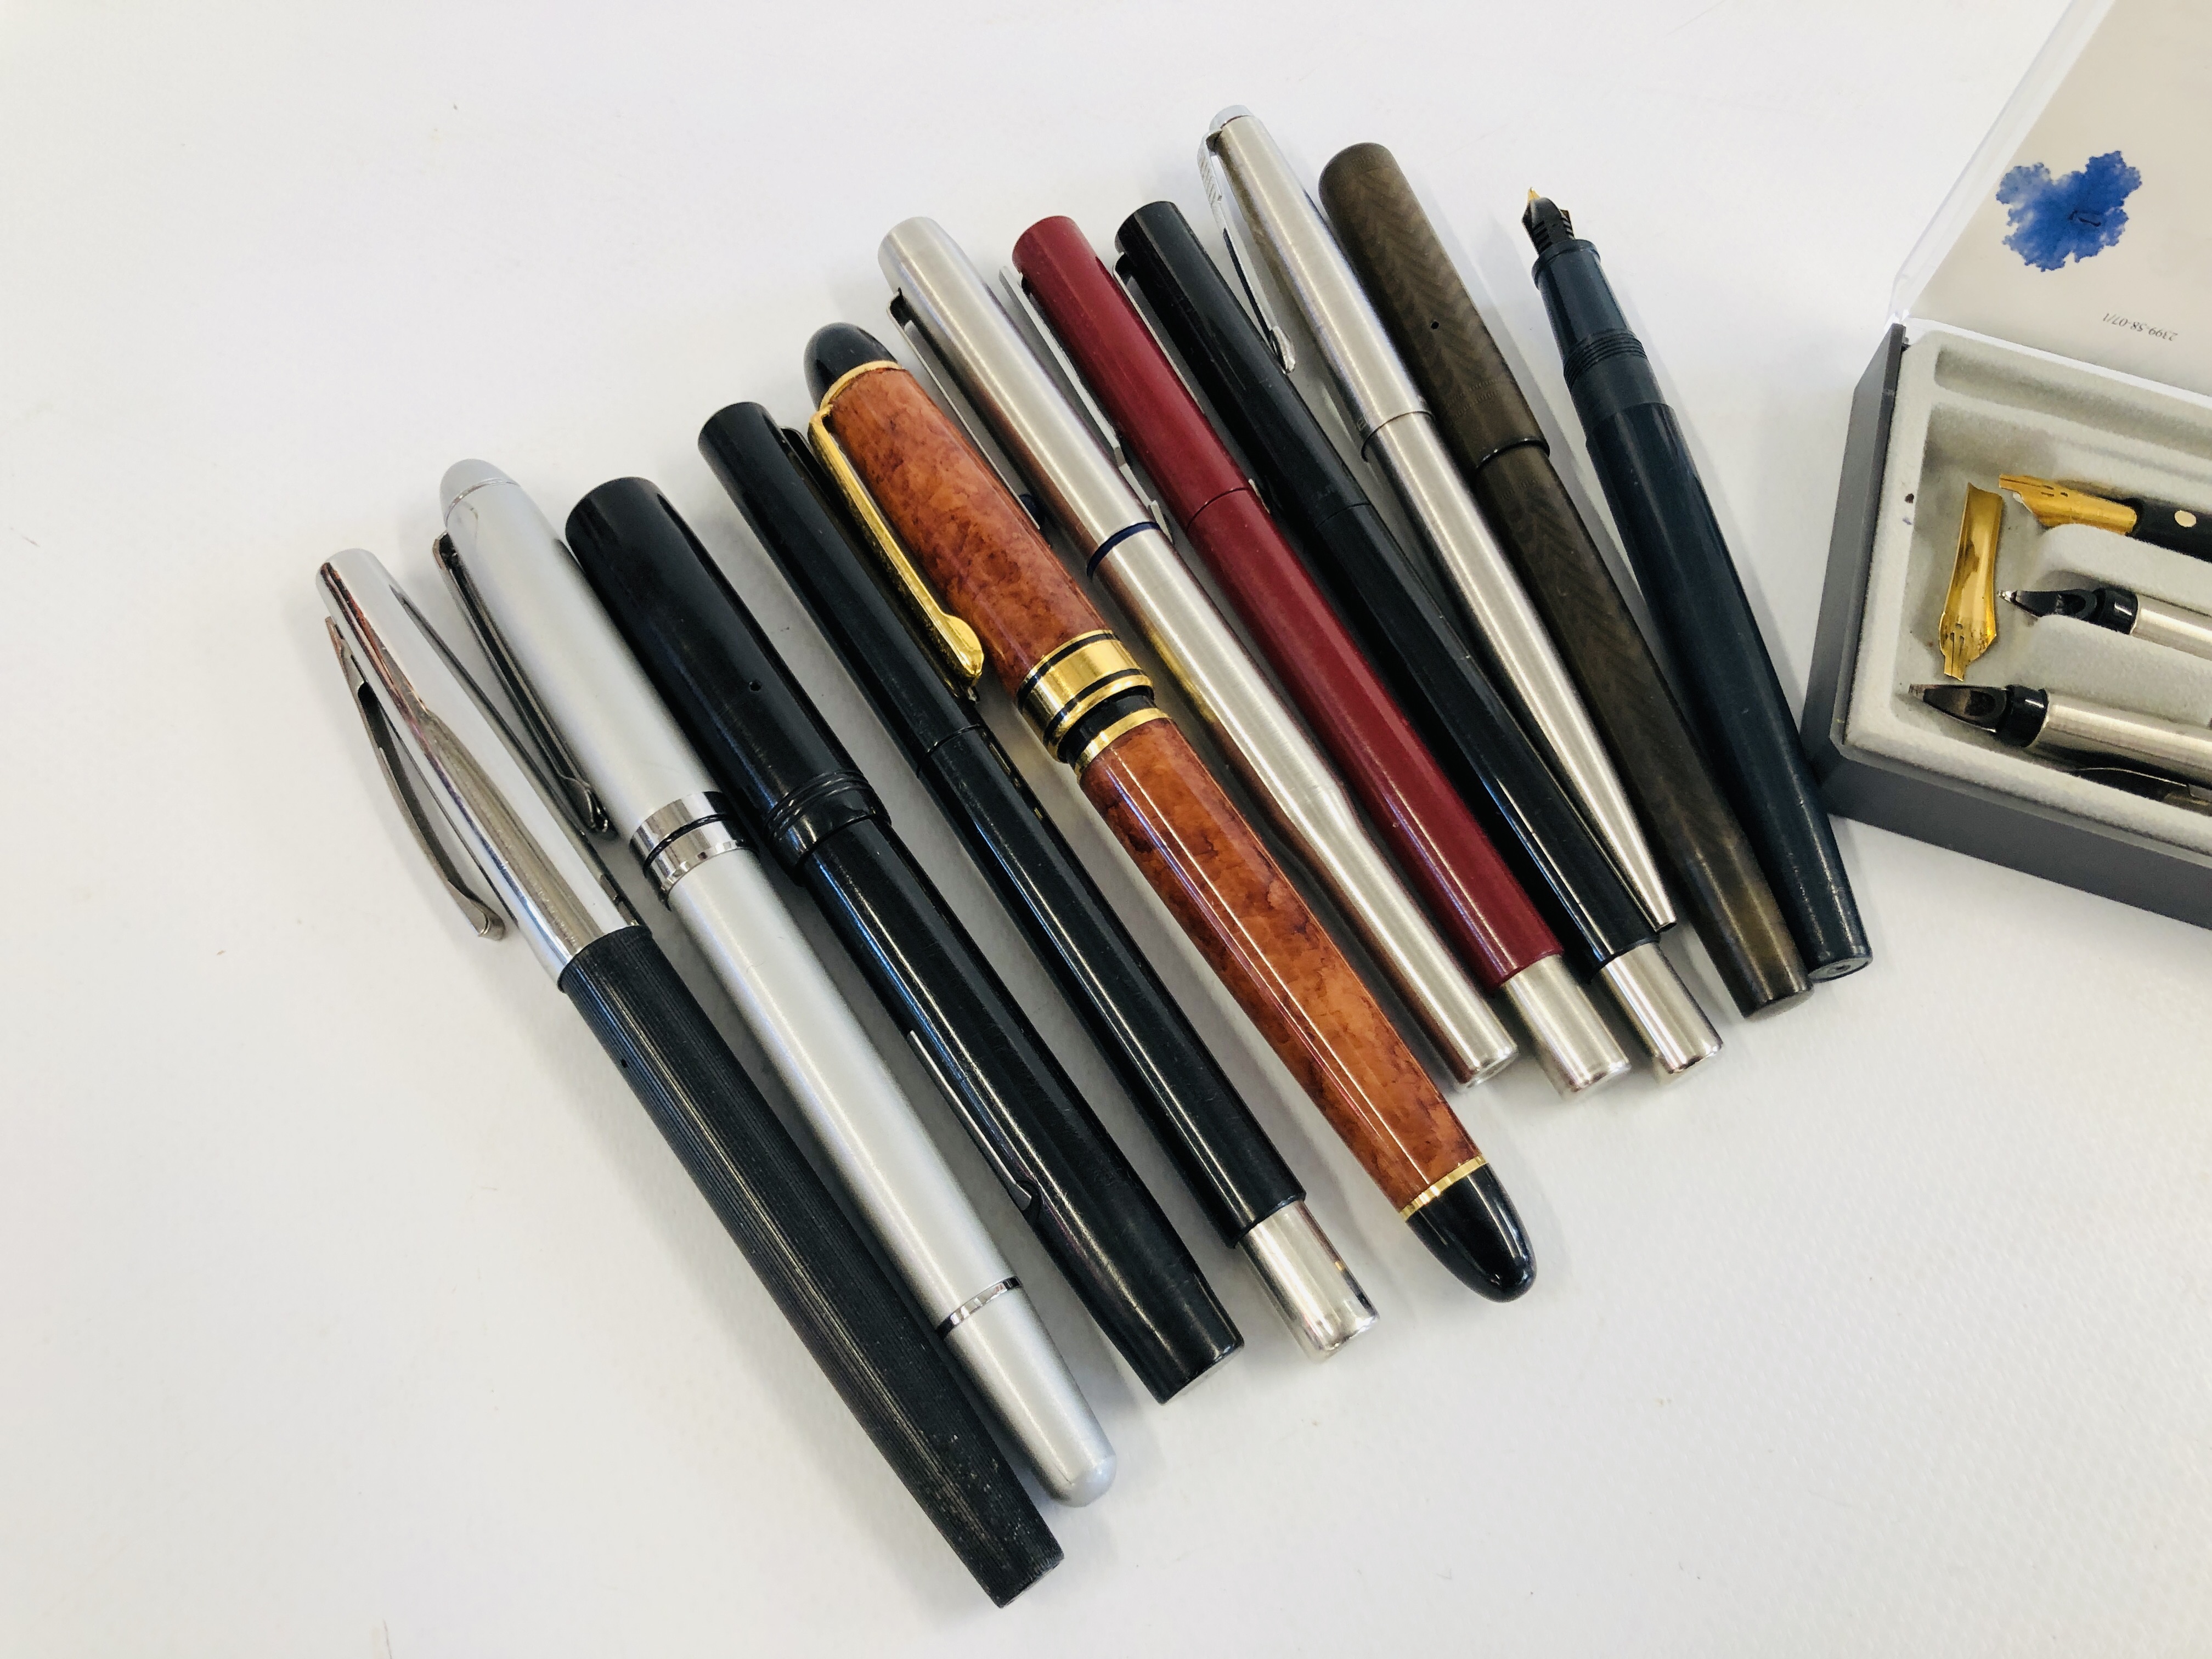 COLLECTION OF VINTAGE PENS AND WRITING EQUIPMENT INCLUDING A "SWAN" SELF-FILLER AND ESTERBROOK WITH - Image 3 of 3